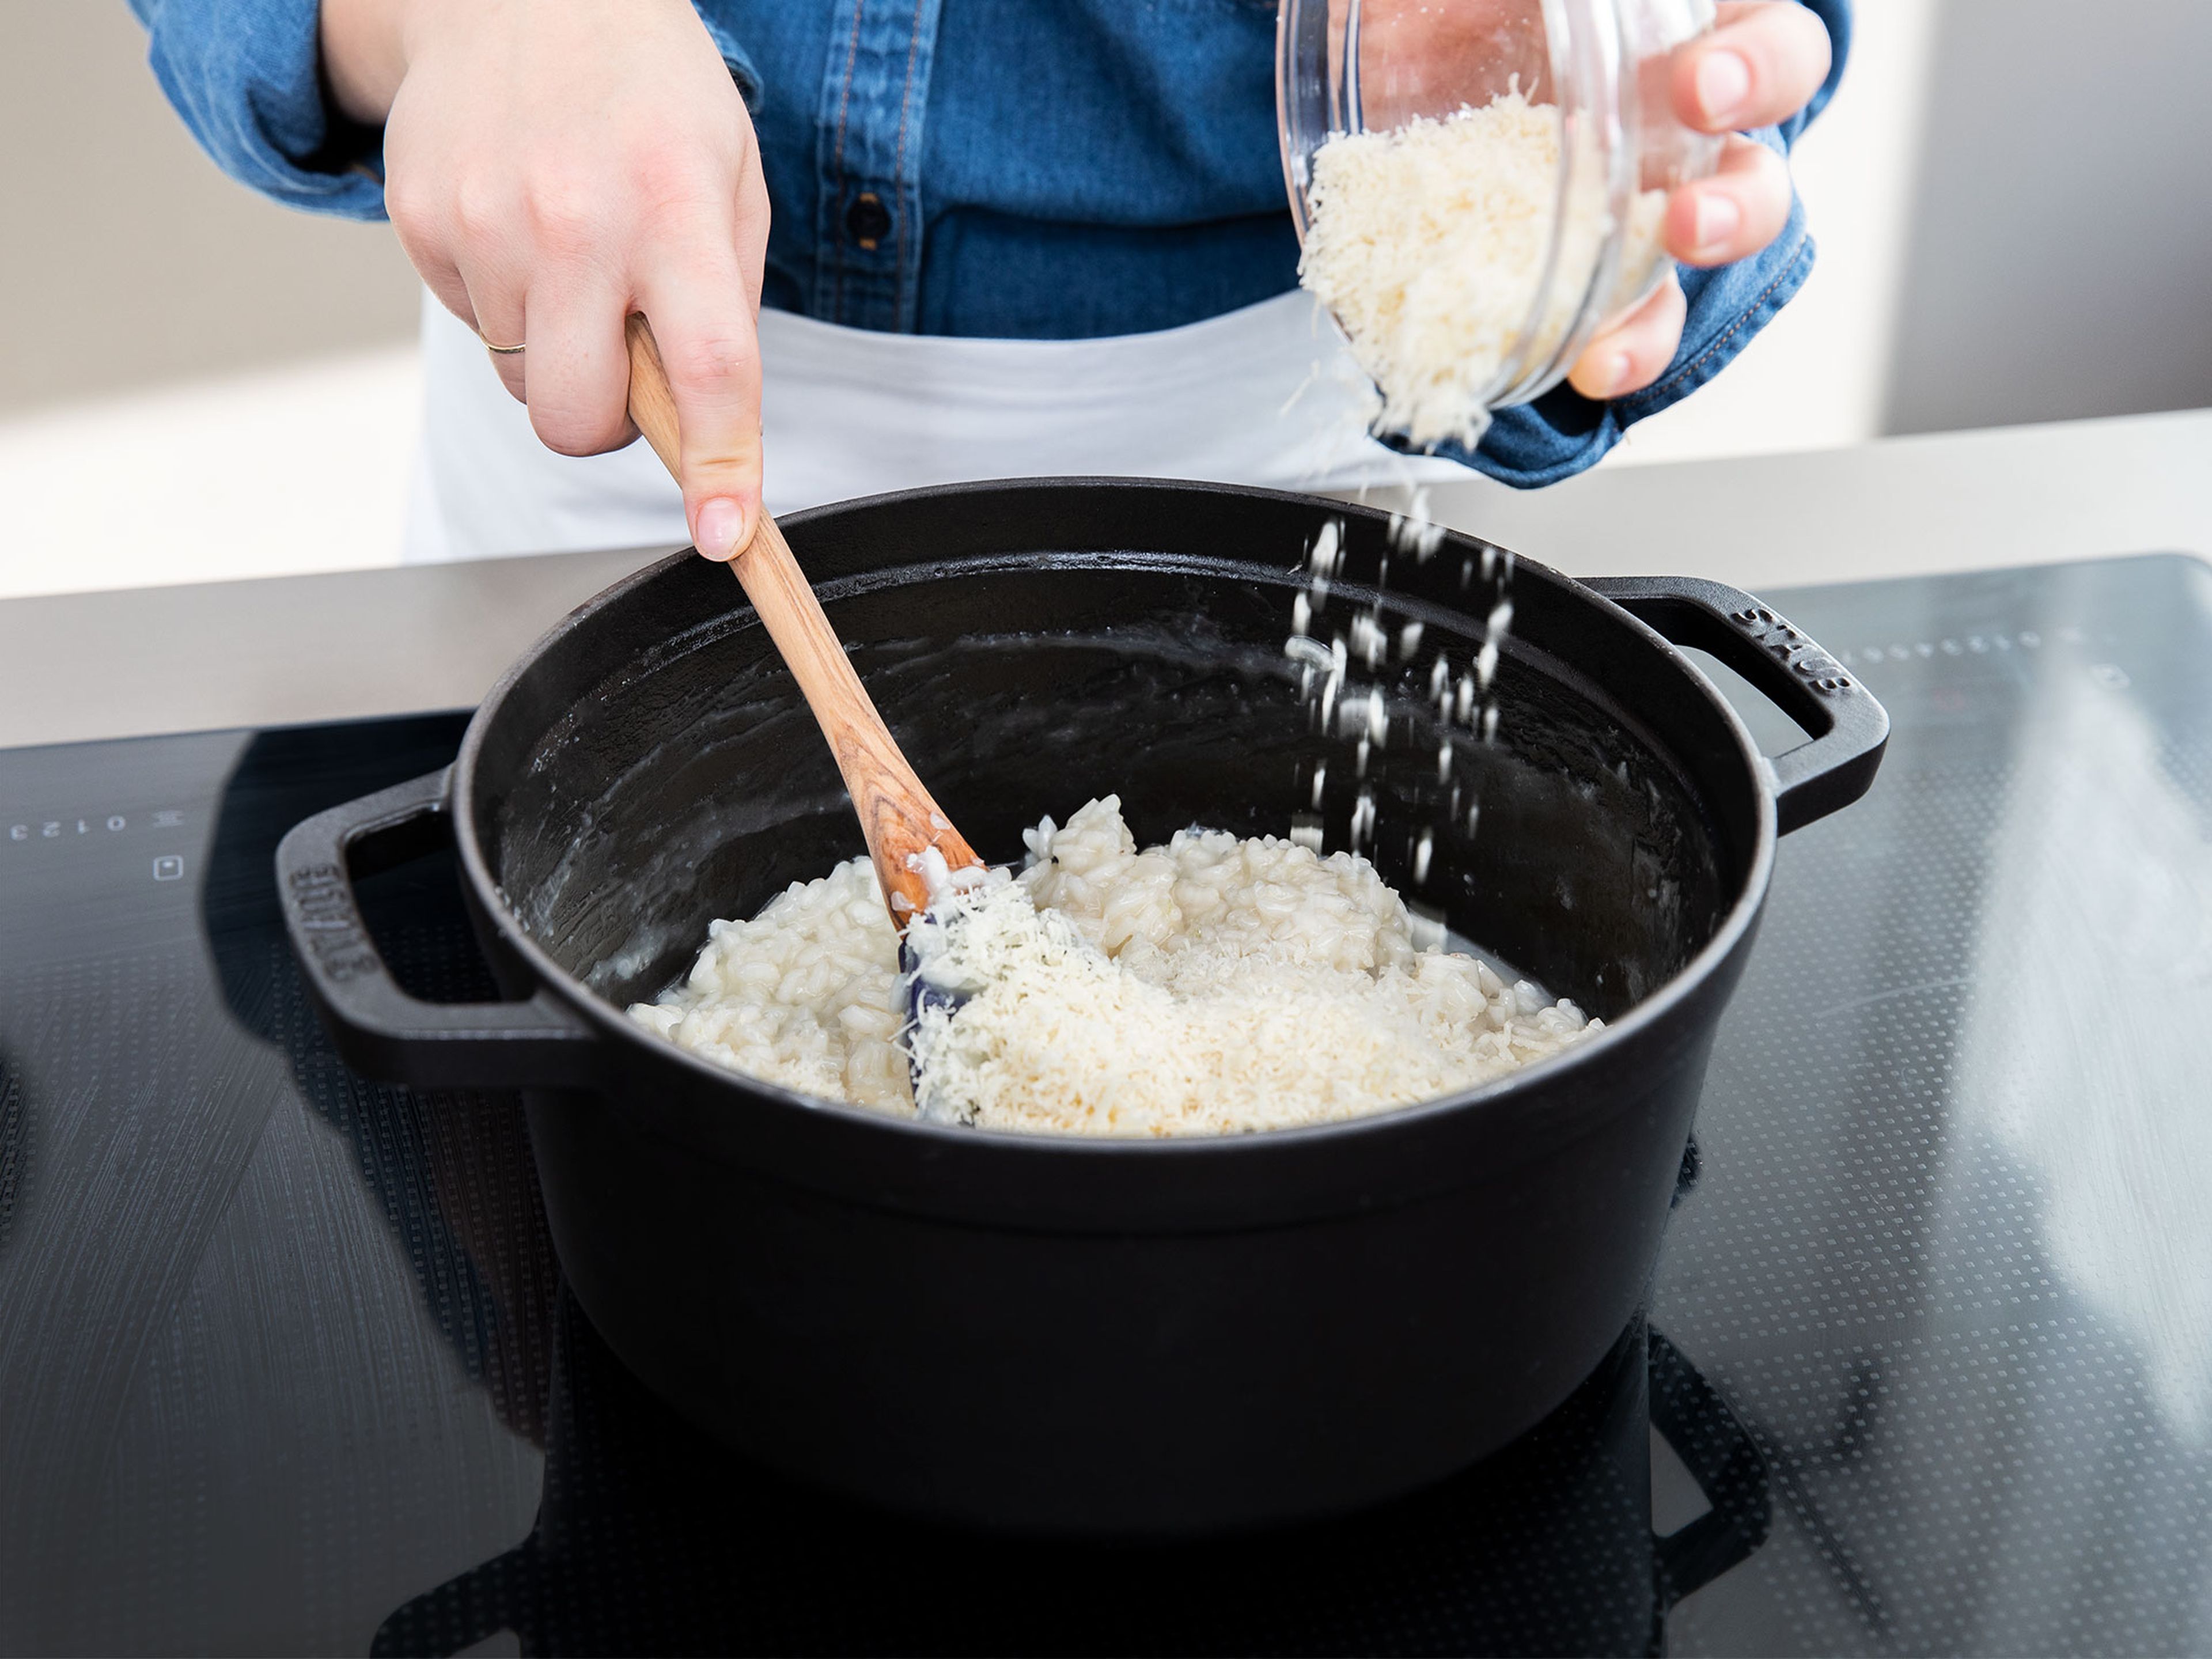 As soon as  the risotto rice has soaked up all liquid and reached the perfect tender texture, add freshly grated Parmesan cheese and half of the butter. Season with salt and pepper to taste. Set aside.